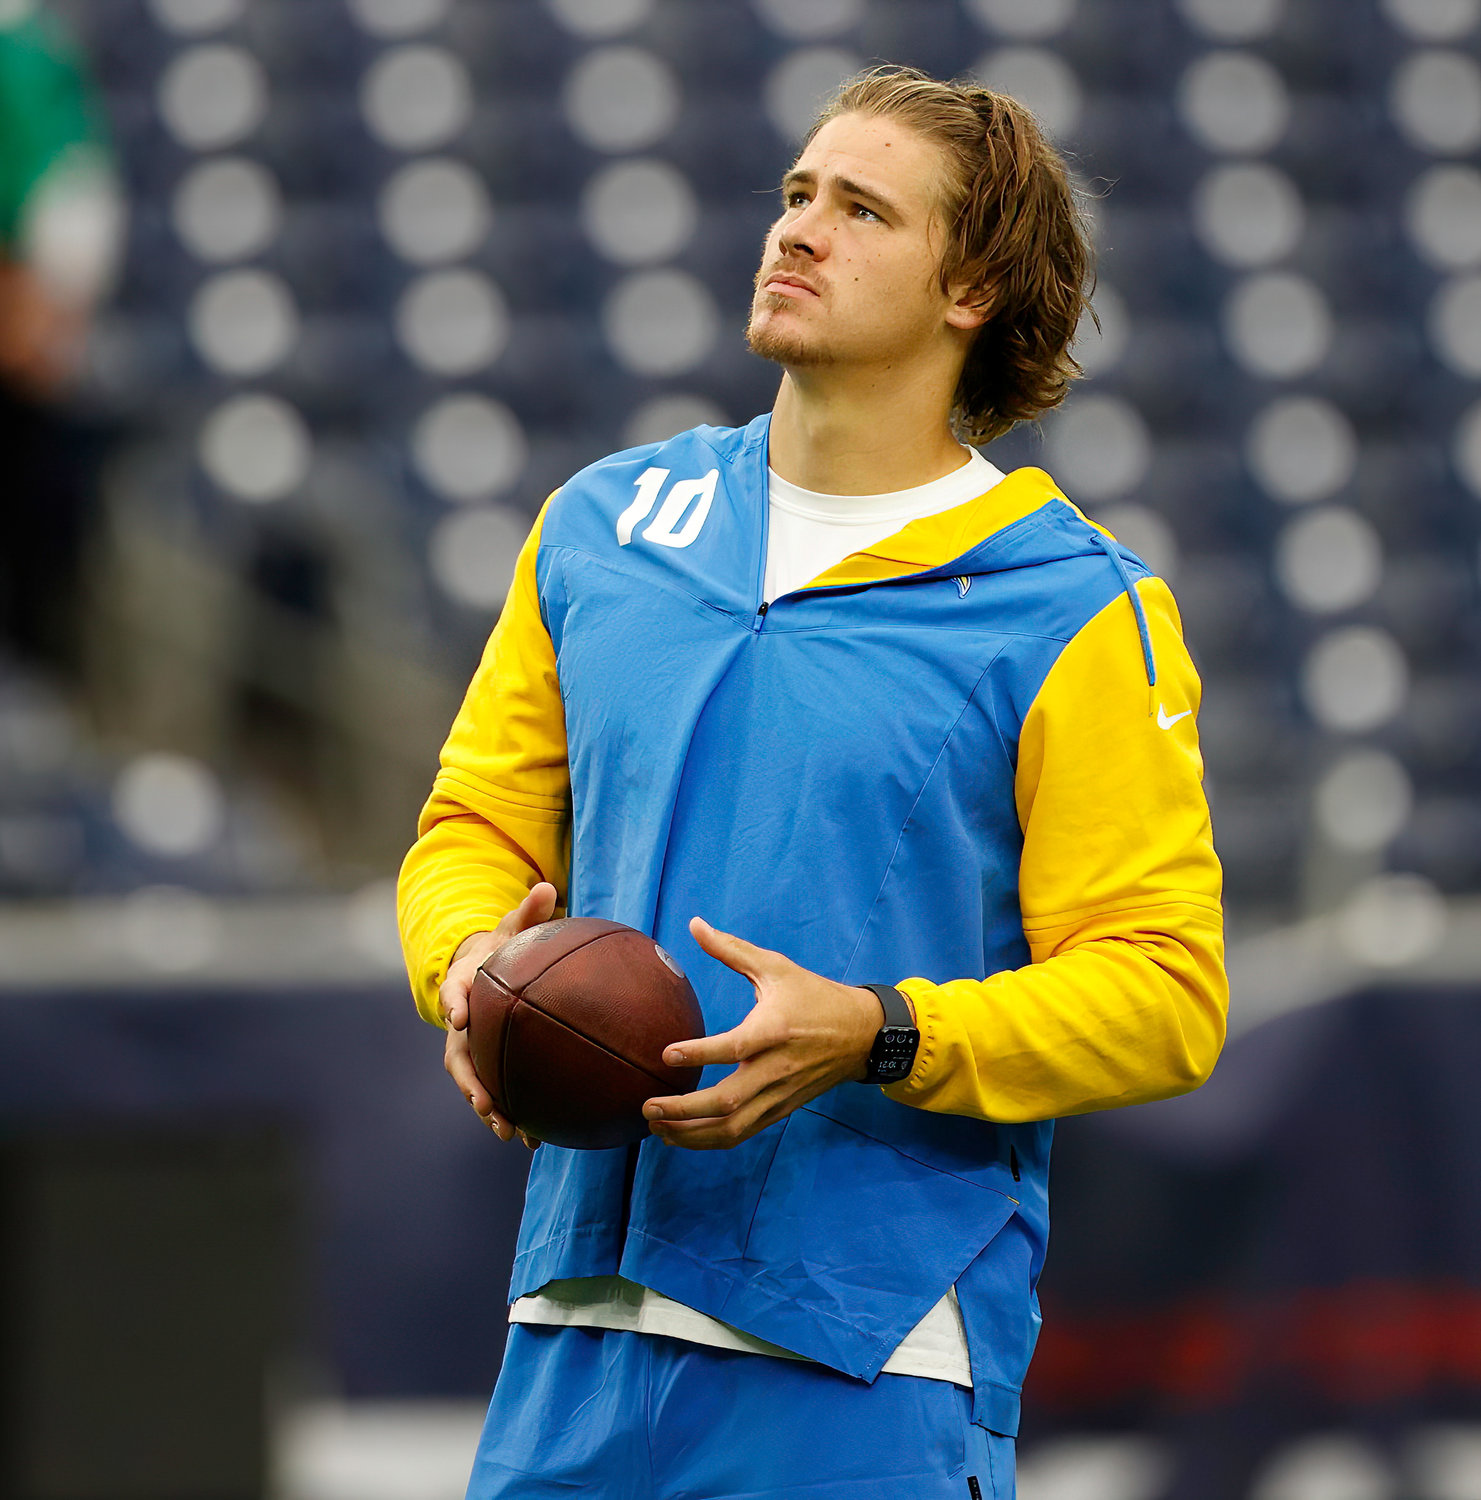 Chargers quarterback Justin Herbert (10) on the field during warmups before an NFL game between the Texans and the Chargers on Oct. 2, 2022 in Houston.